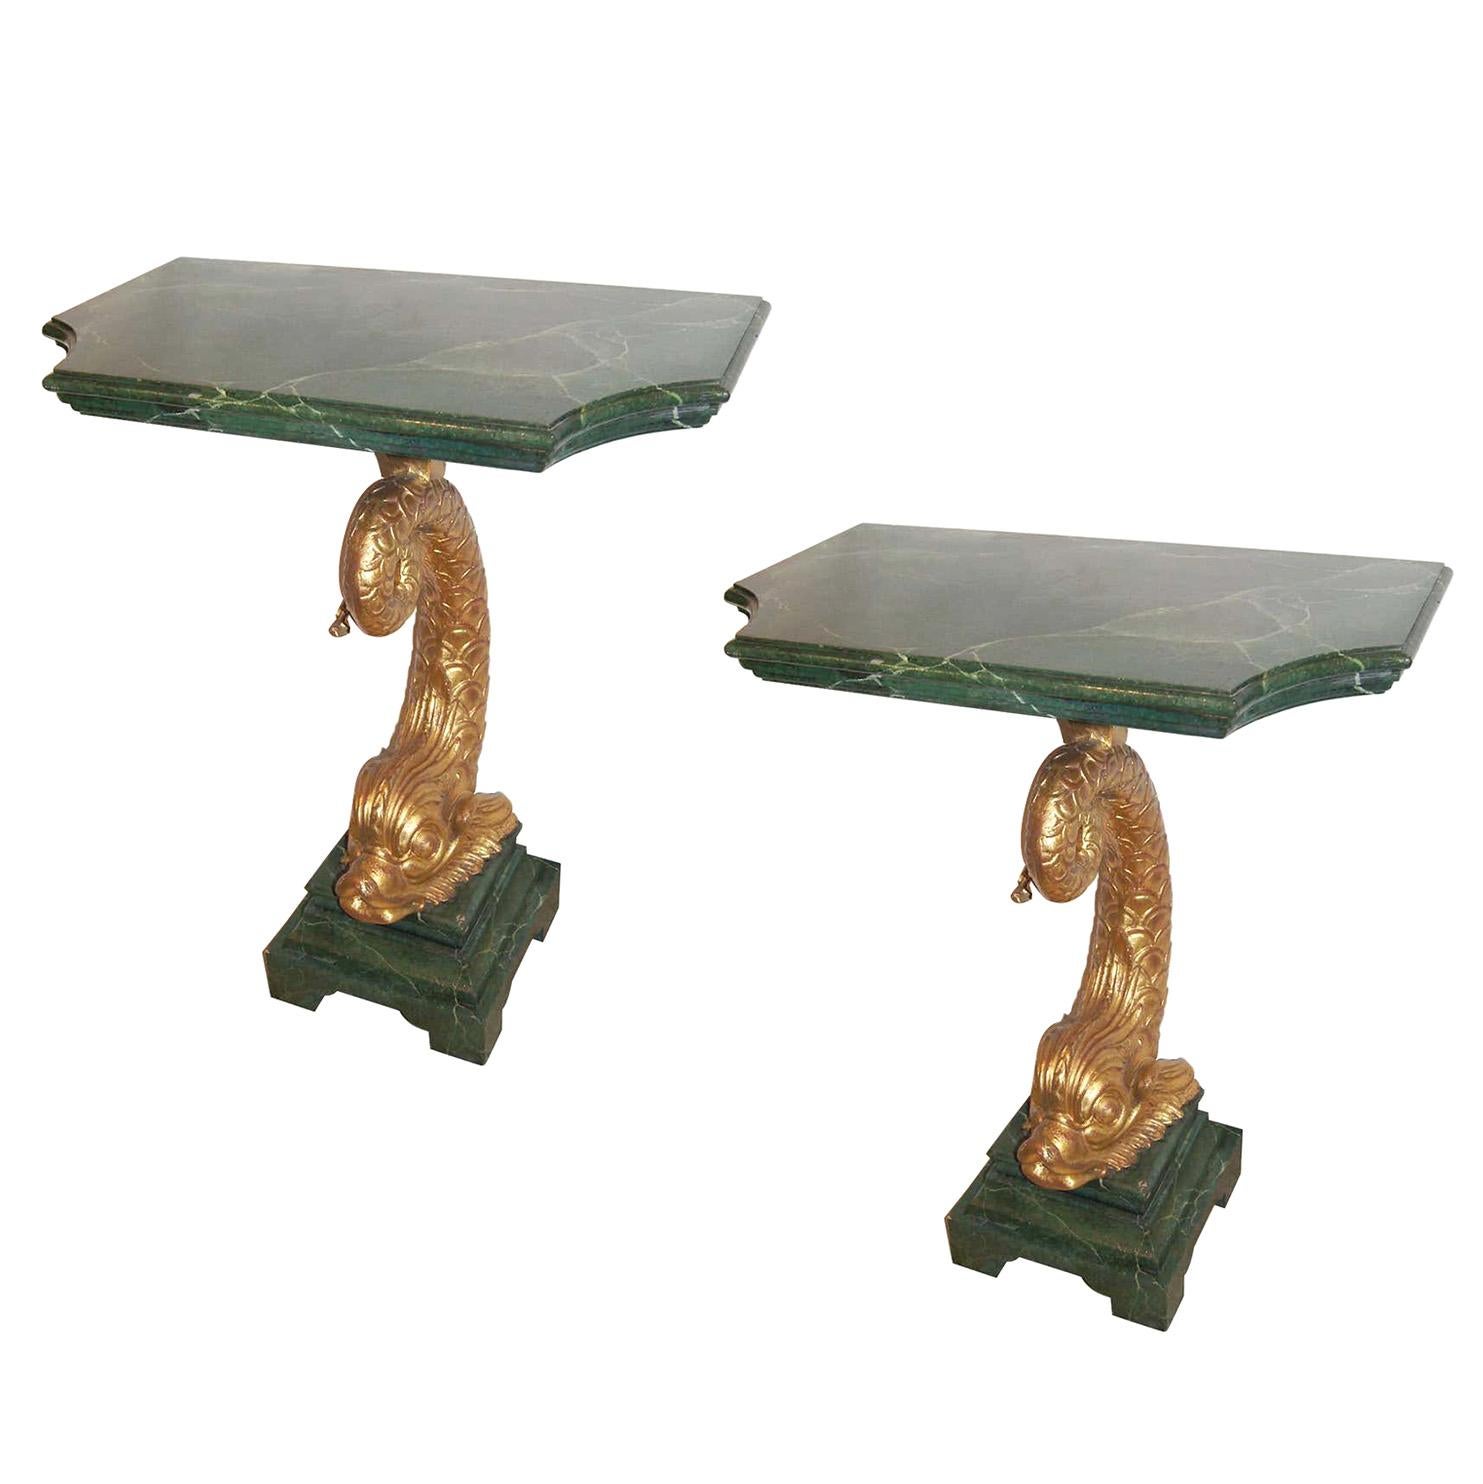 A pair of vintage Italian carved and giltwood faux marble-top console tables with dolphin-shaped bases. Sold individually.
Measurements:
Height 32